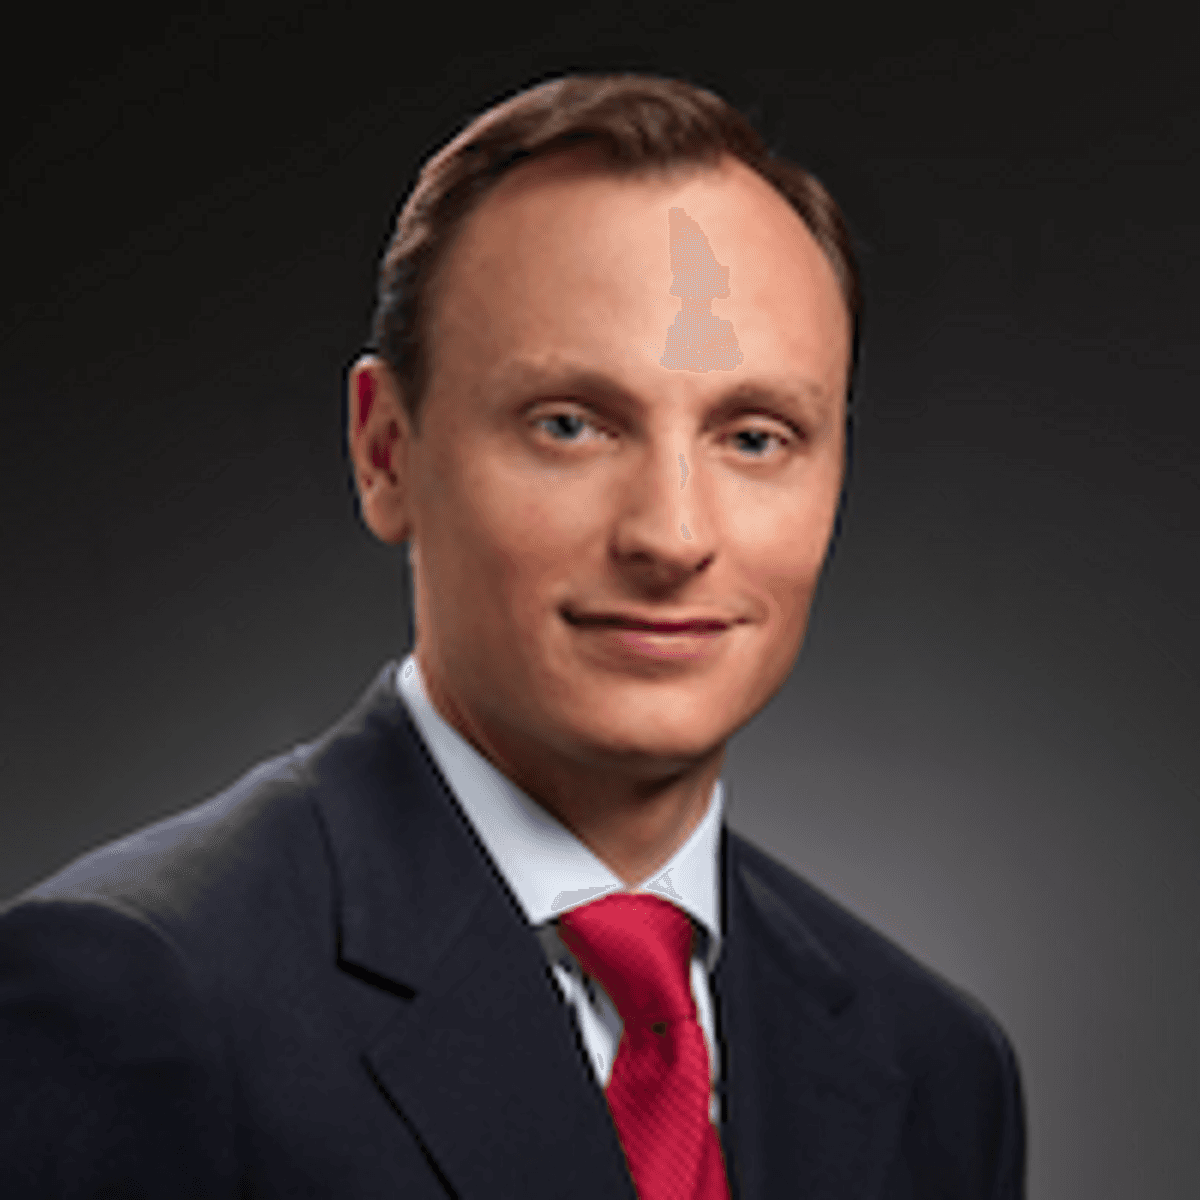 Kevin Samuelson is CEO van Infor image